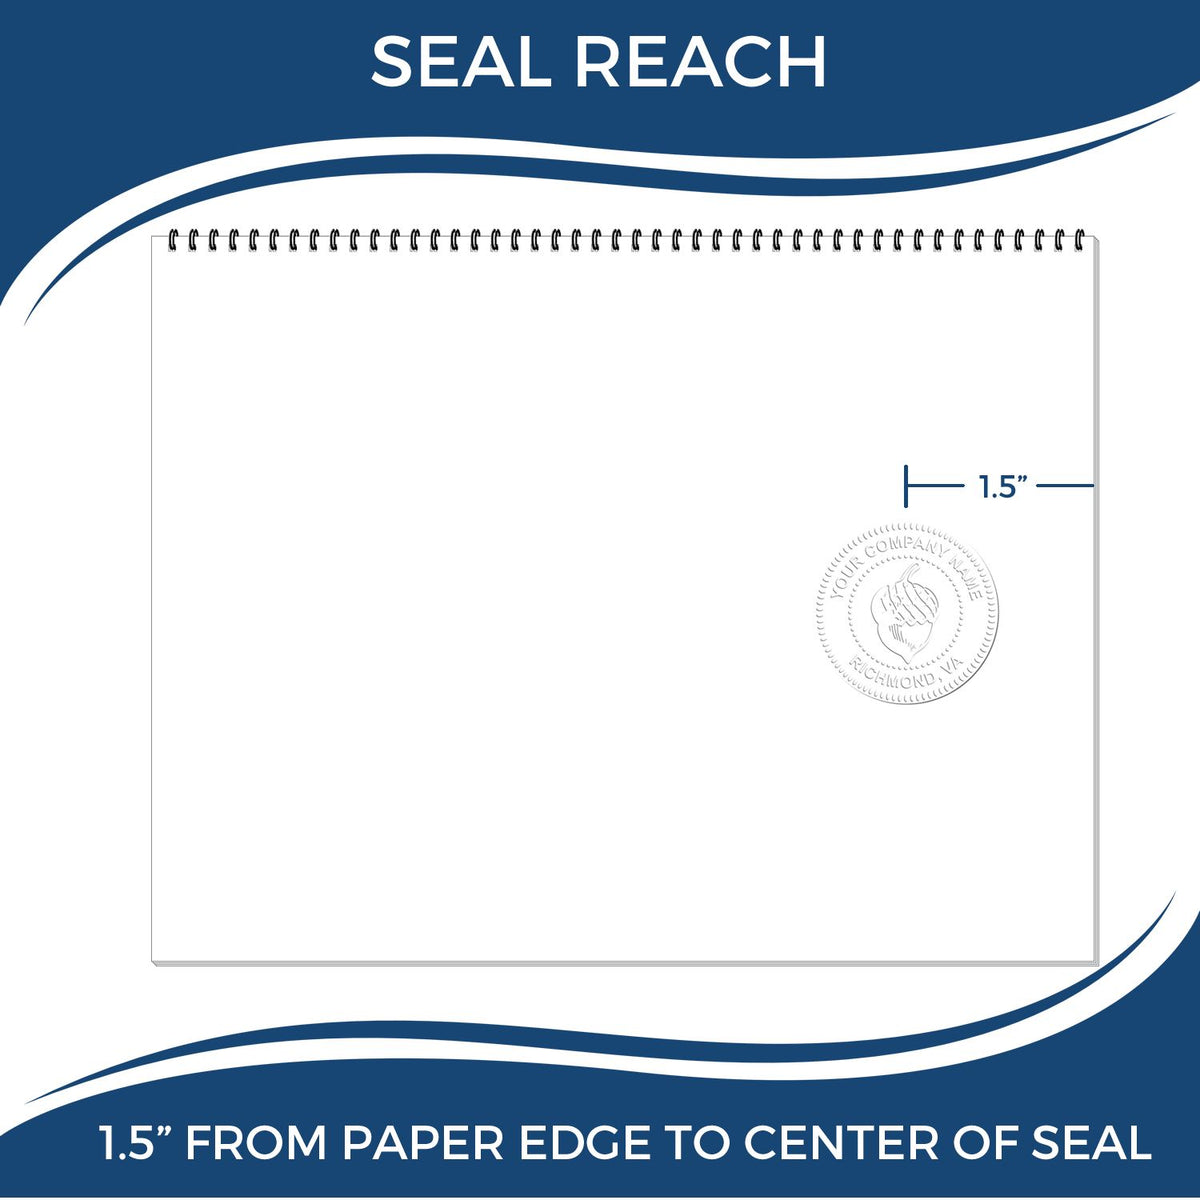 An infographic showing the seal reach which is represented by a ruler and a miniature seal image of the Illinois Geologist Desk Seal